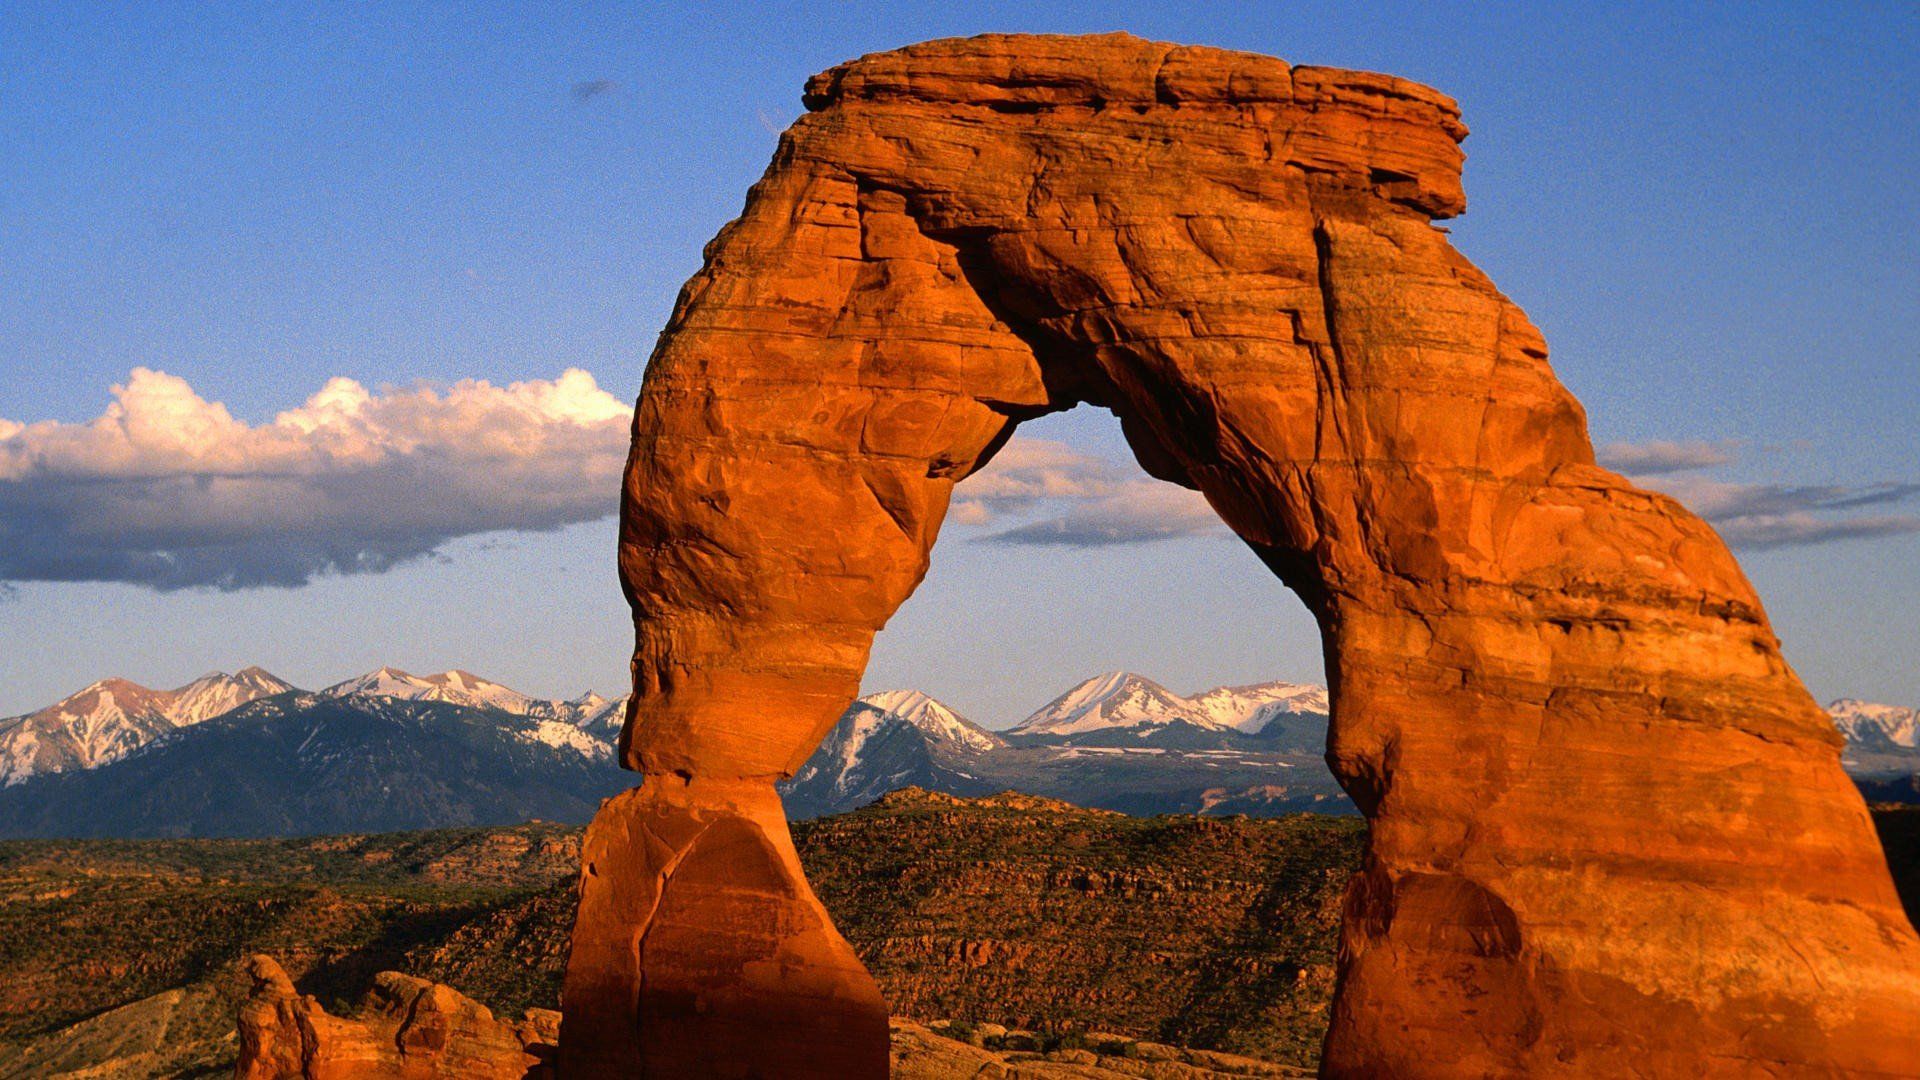 Arches National Park Figures From The Rocks Of Nature HD Wallpaper Download For Mobile, Wallpaper13.com